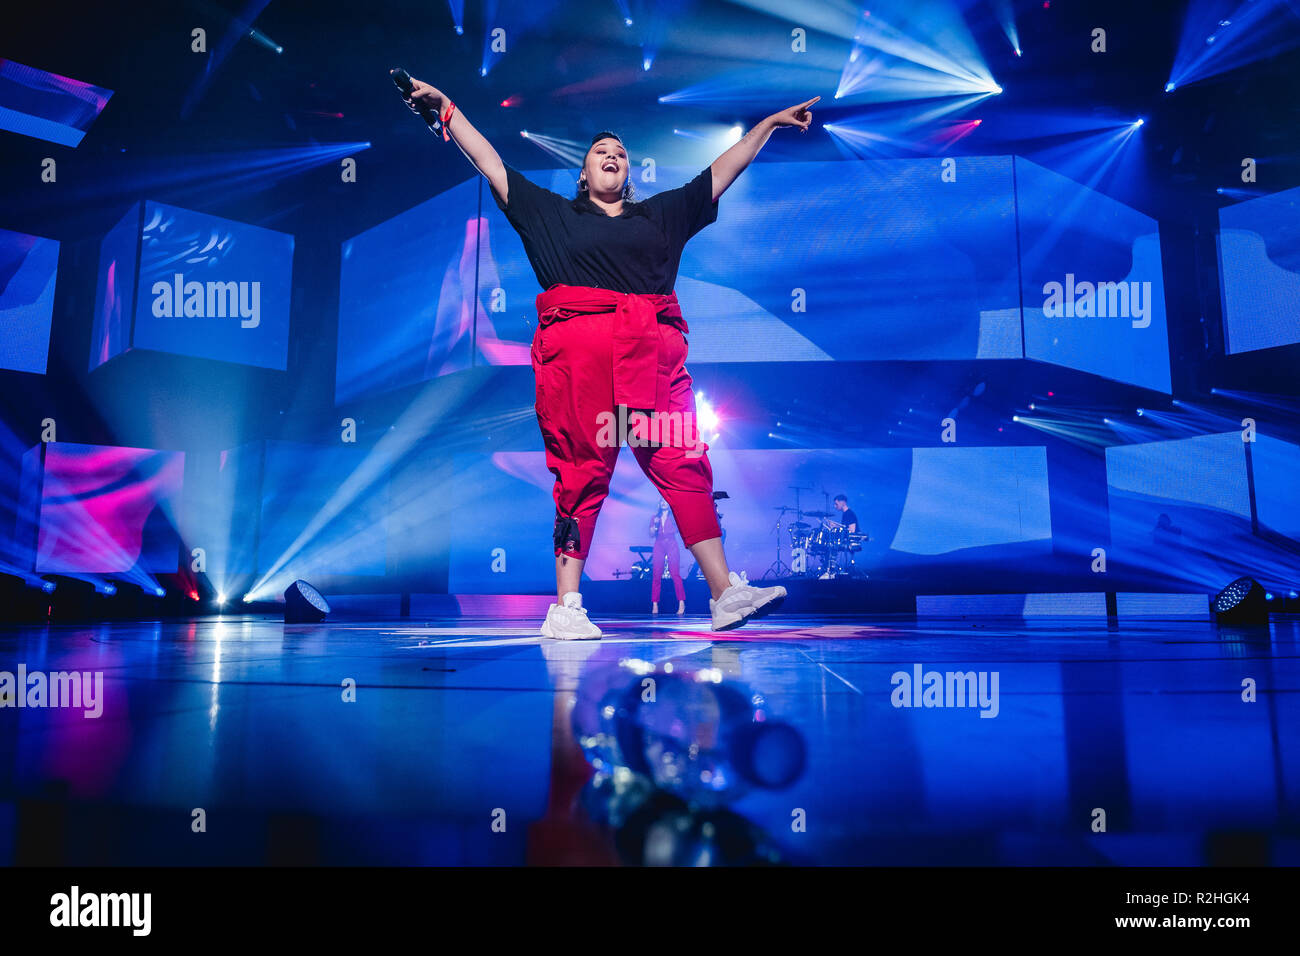 Switzerland, Zürich - November 16, 2018. The English electronic music group Clean Bandit performs a live concert during the Energy Star Night 2018 in Hallenstadion in Zürich. Here singer Yasmin Green is seen live on stage. (Photo credit: Gonzales Photo - Tilman Jentzsch). Stock Photo